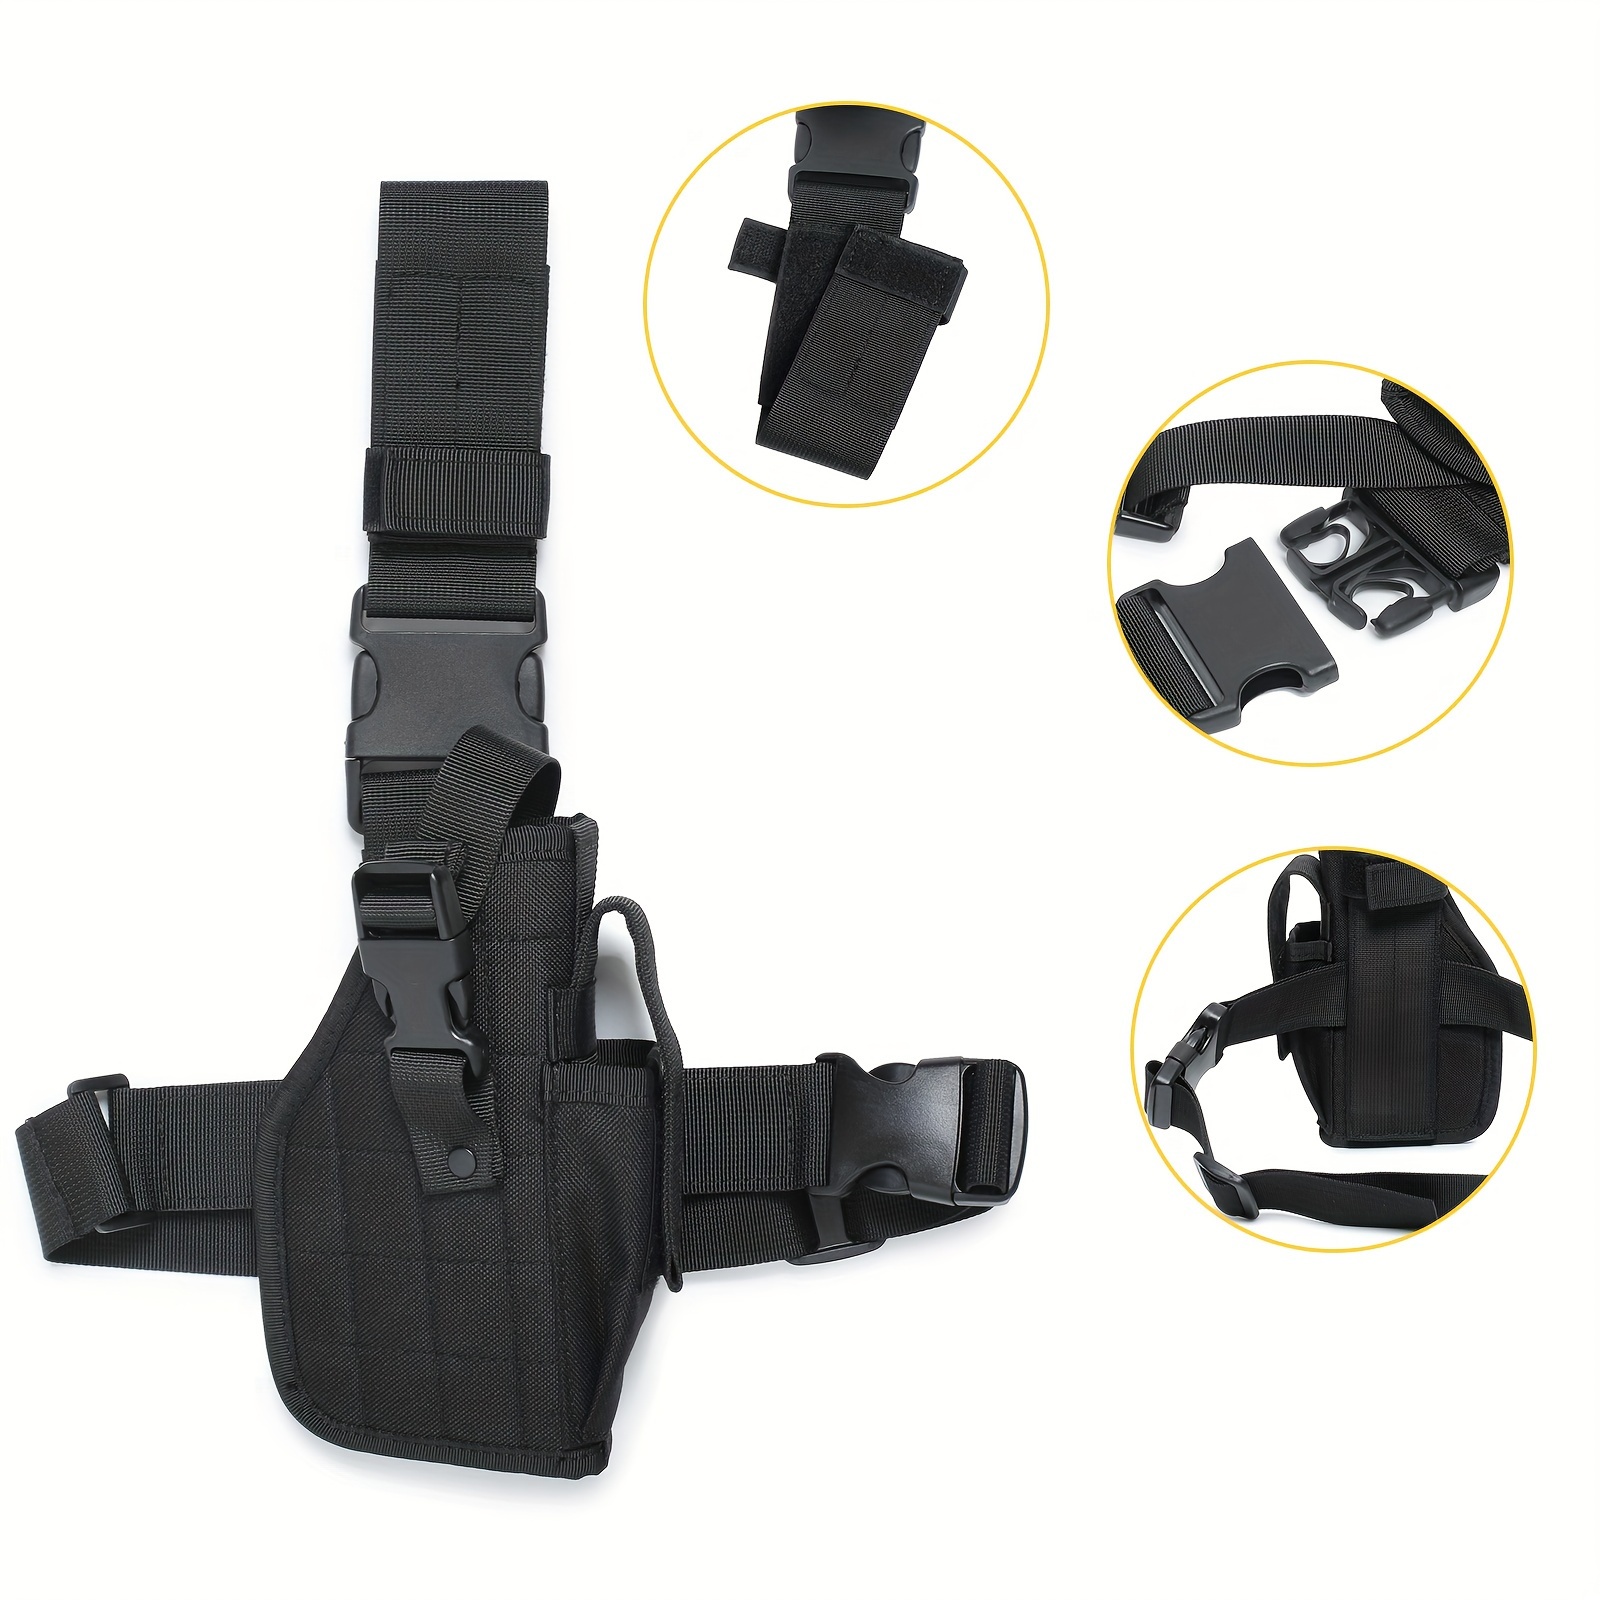  Drop Leg Holster Right Handed - Airsoft Holster with Magazine  Pouch Thigh Pistol Gun Holster Tactical Adjustable,Suitable to Hold Full  Size Mid Size and Compact Pistols. (Black) : Sports 